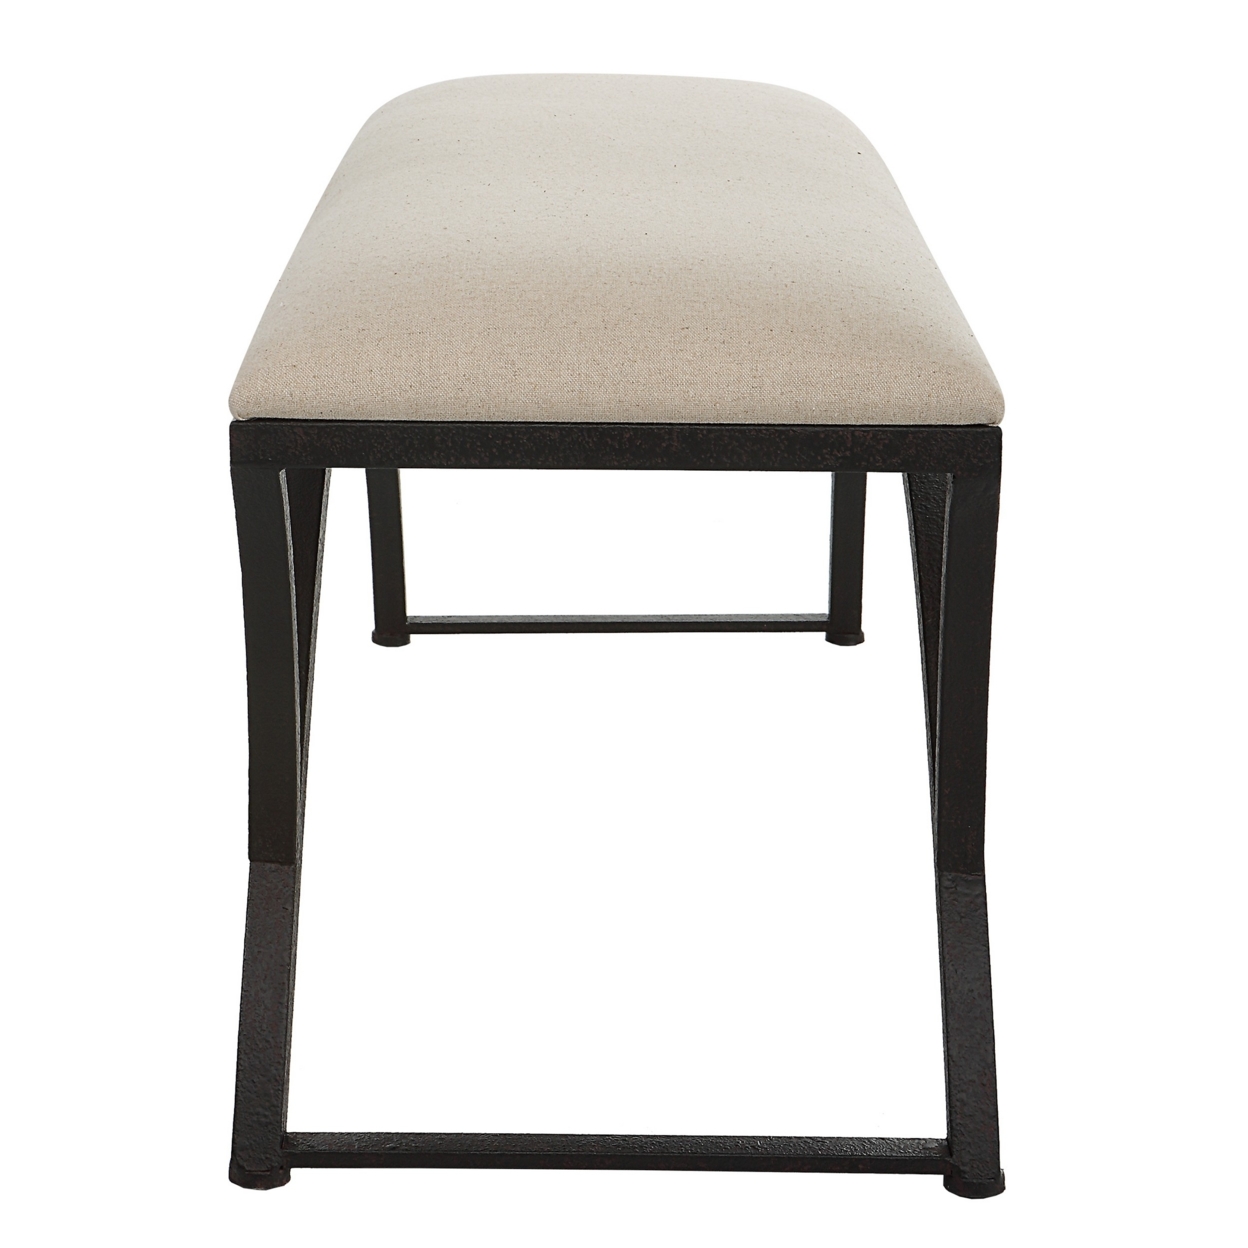 47 Inch Modern Accent Bench With Arched Frame, Cushioned Top, Beige, Black- Saltoro Sherpi